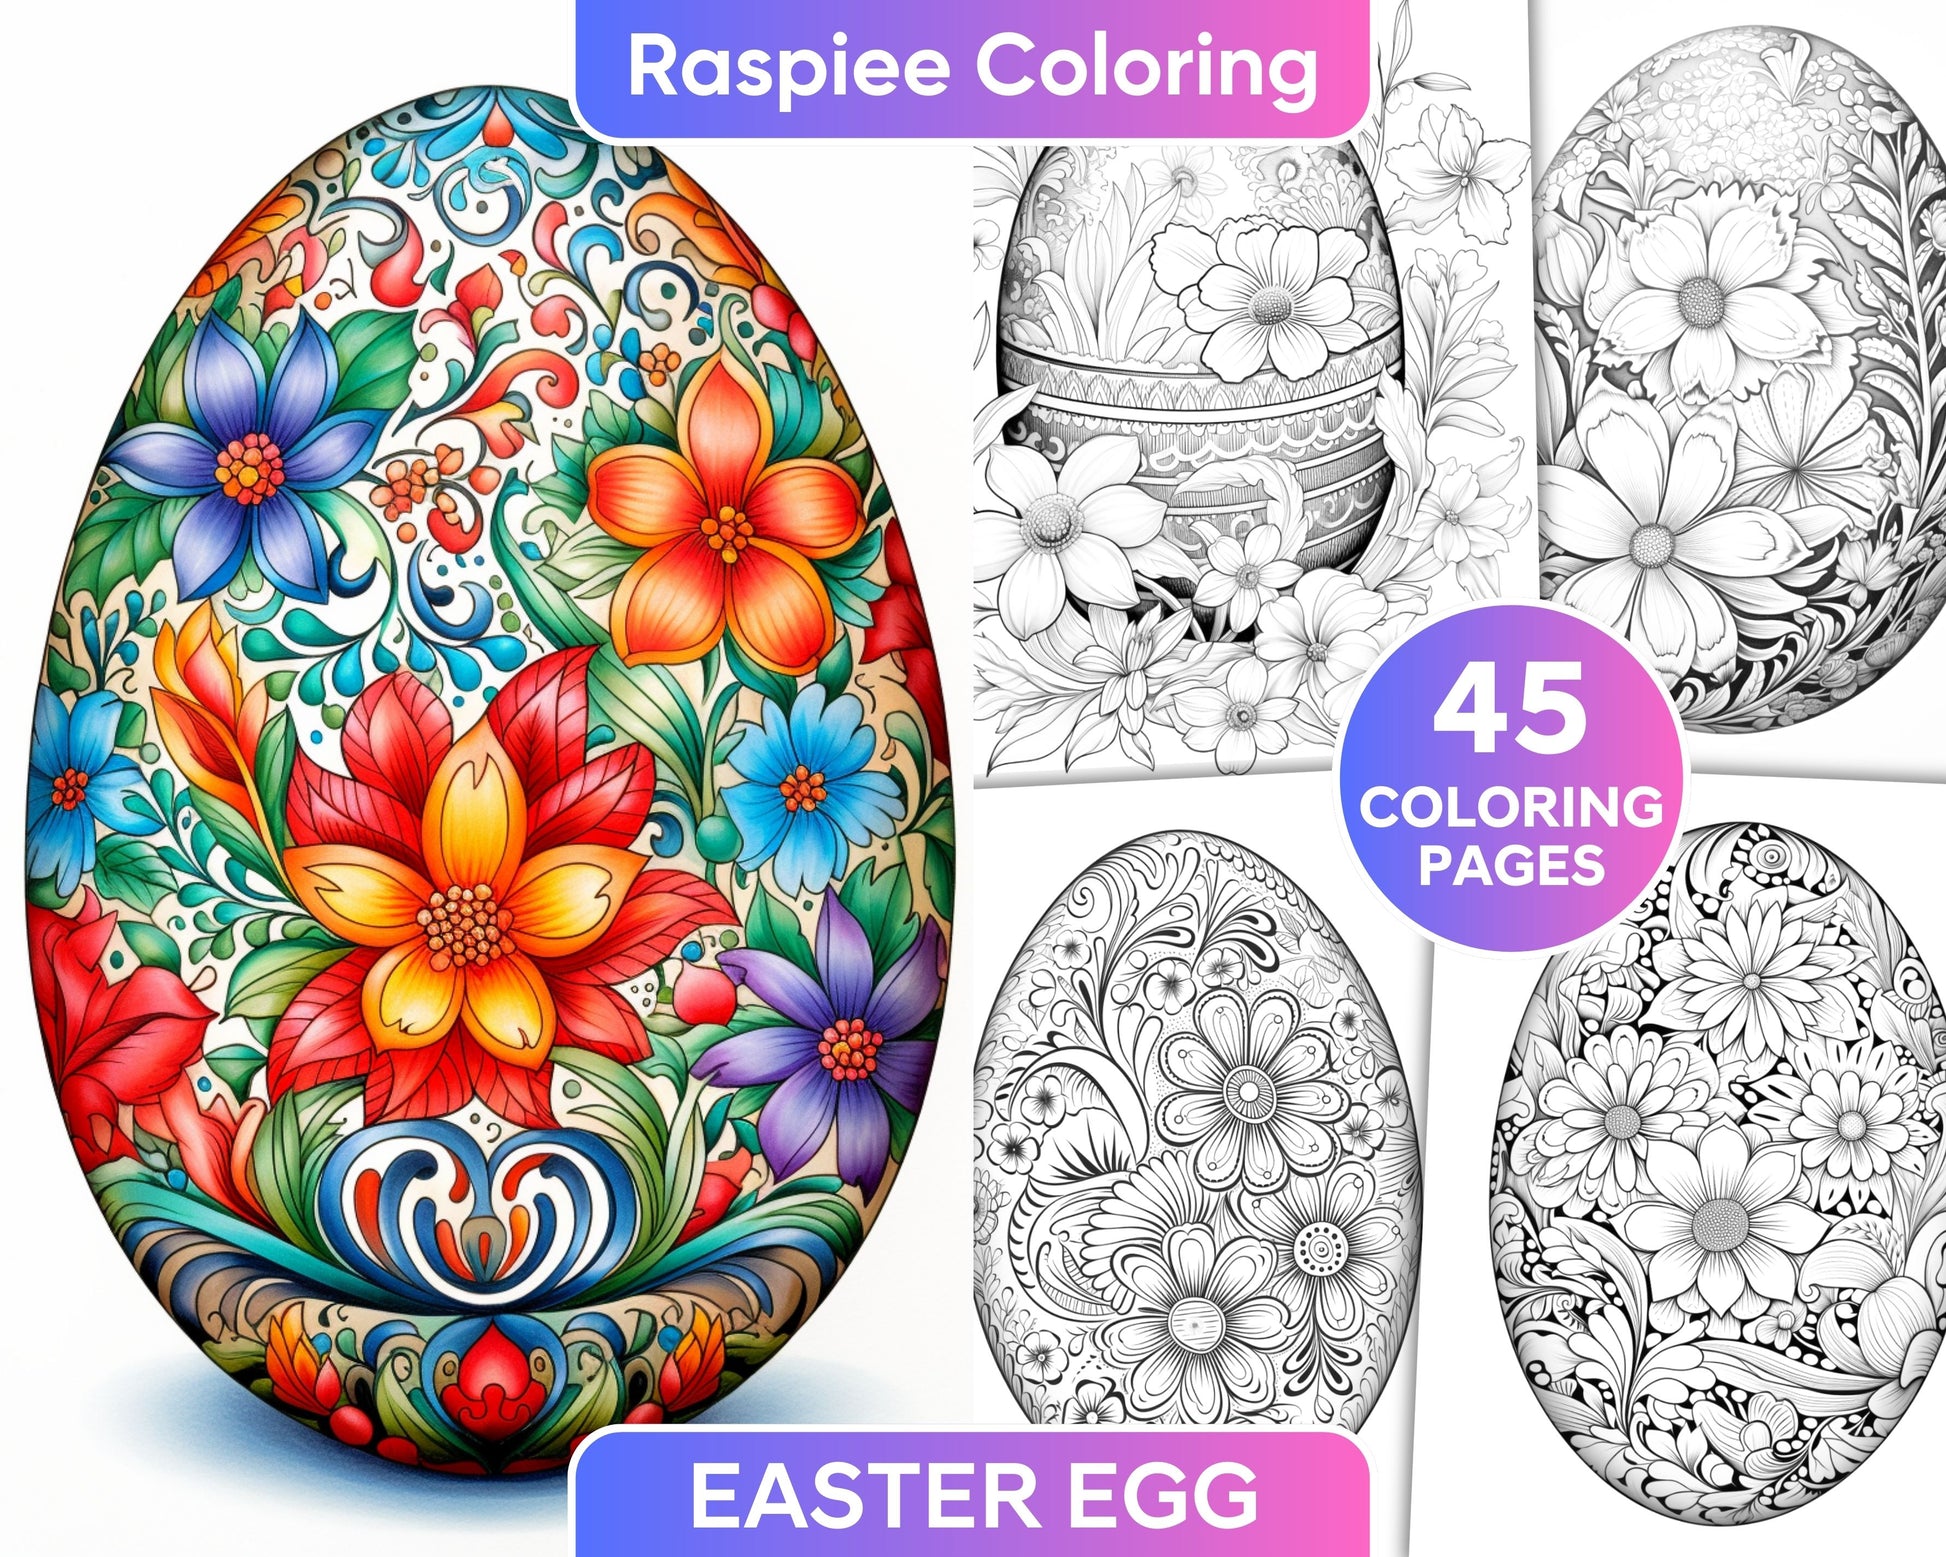 adult coloring pages, adult coloring sheets, adult coloring book pdf, adult coloring book printable, grayscale coloring pages, grayscale coloring books, spring coloring pages, spring coloring book, holiday coloring pages, easter coloring pages for adults, easter coloring book, easter egg coloring pages